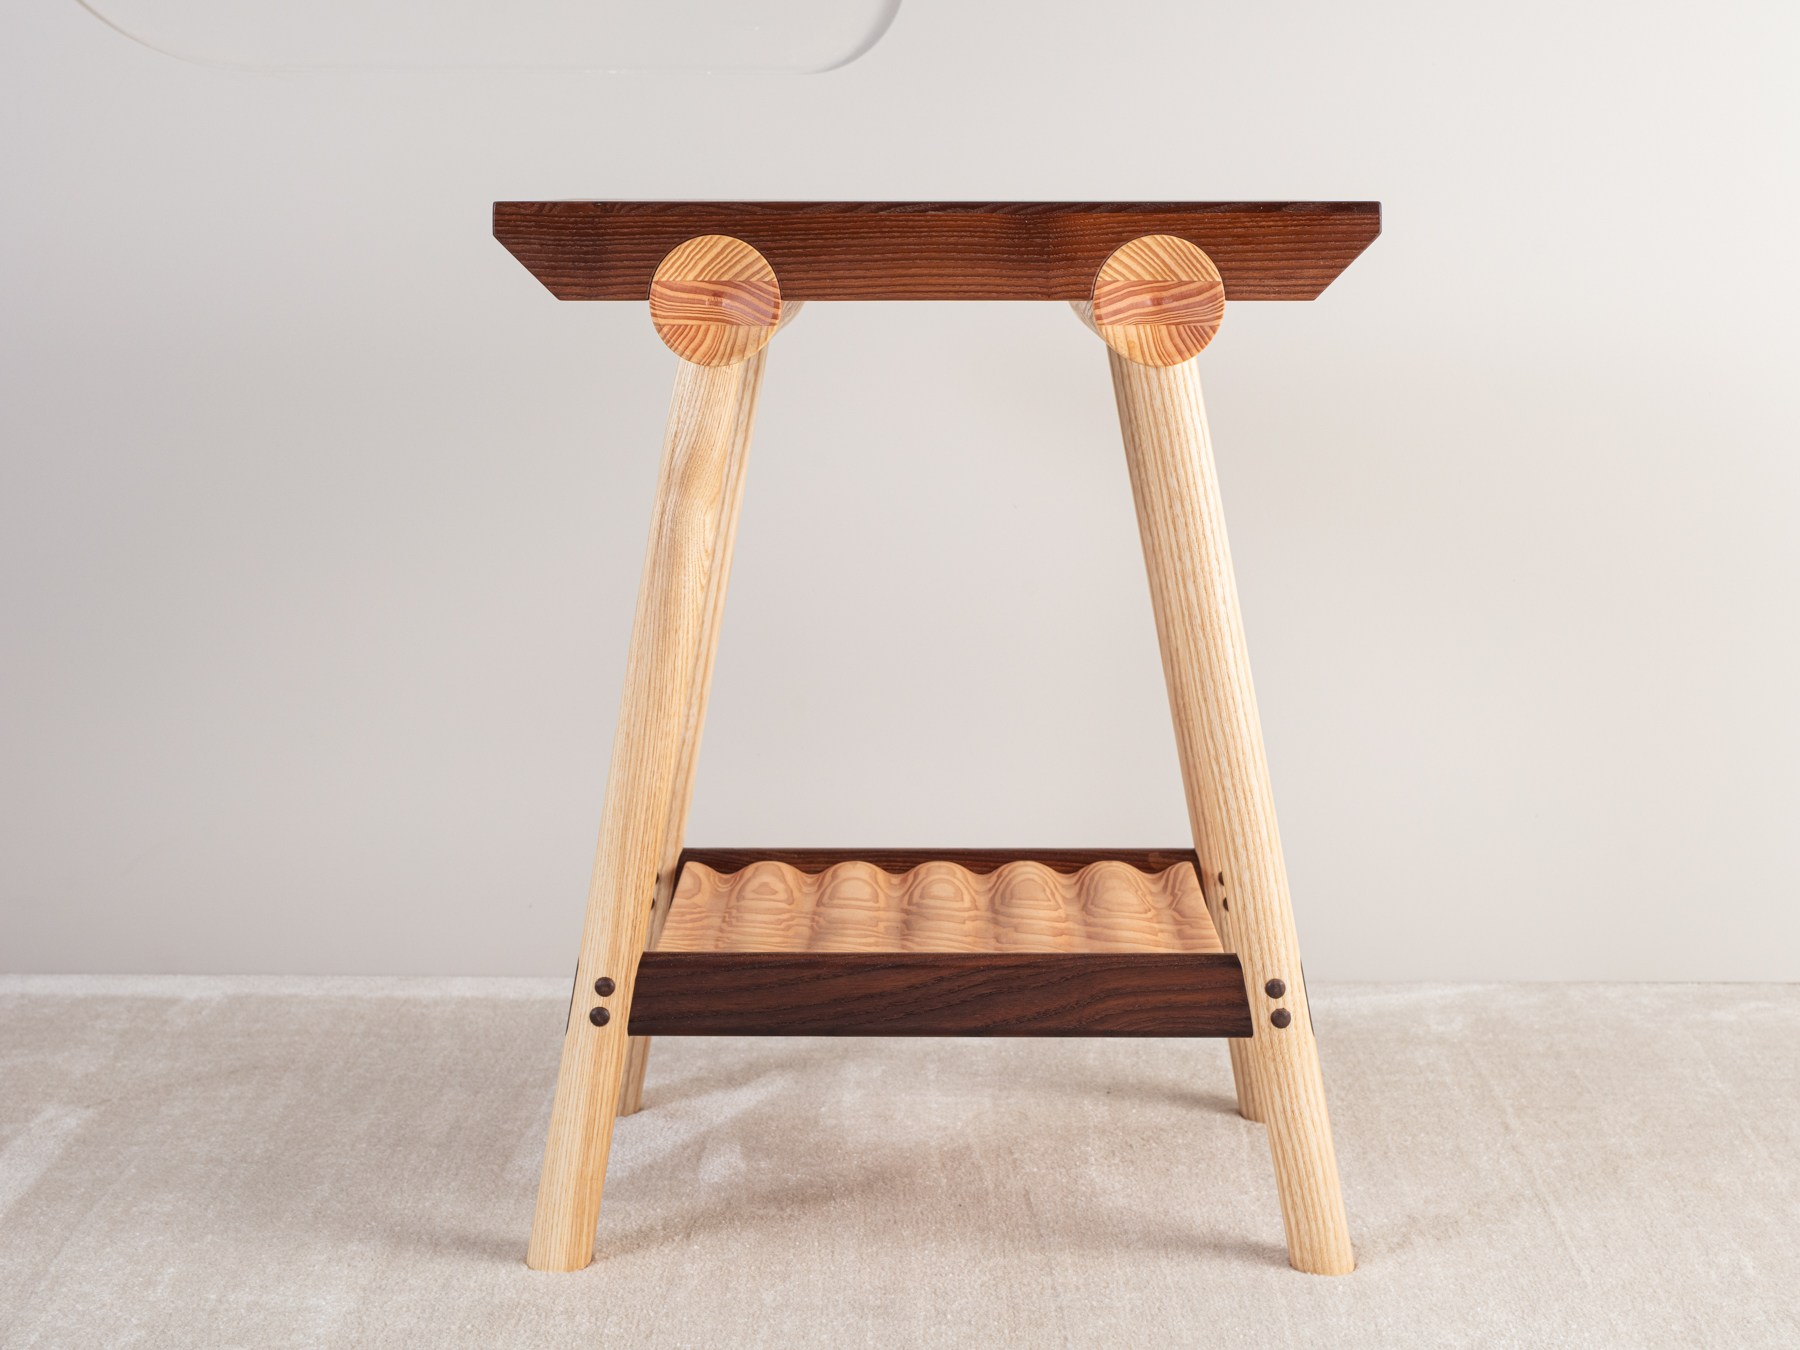 A four-legged table with hand turned dowel sections. Mortice and tenon rails, with accentuated dowel button detailing. A tippled Douglas fir shelf below accentuates the timber's stunning natural grain detail.